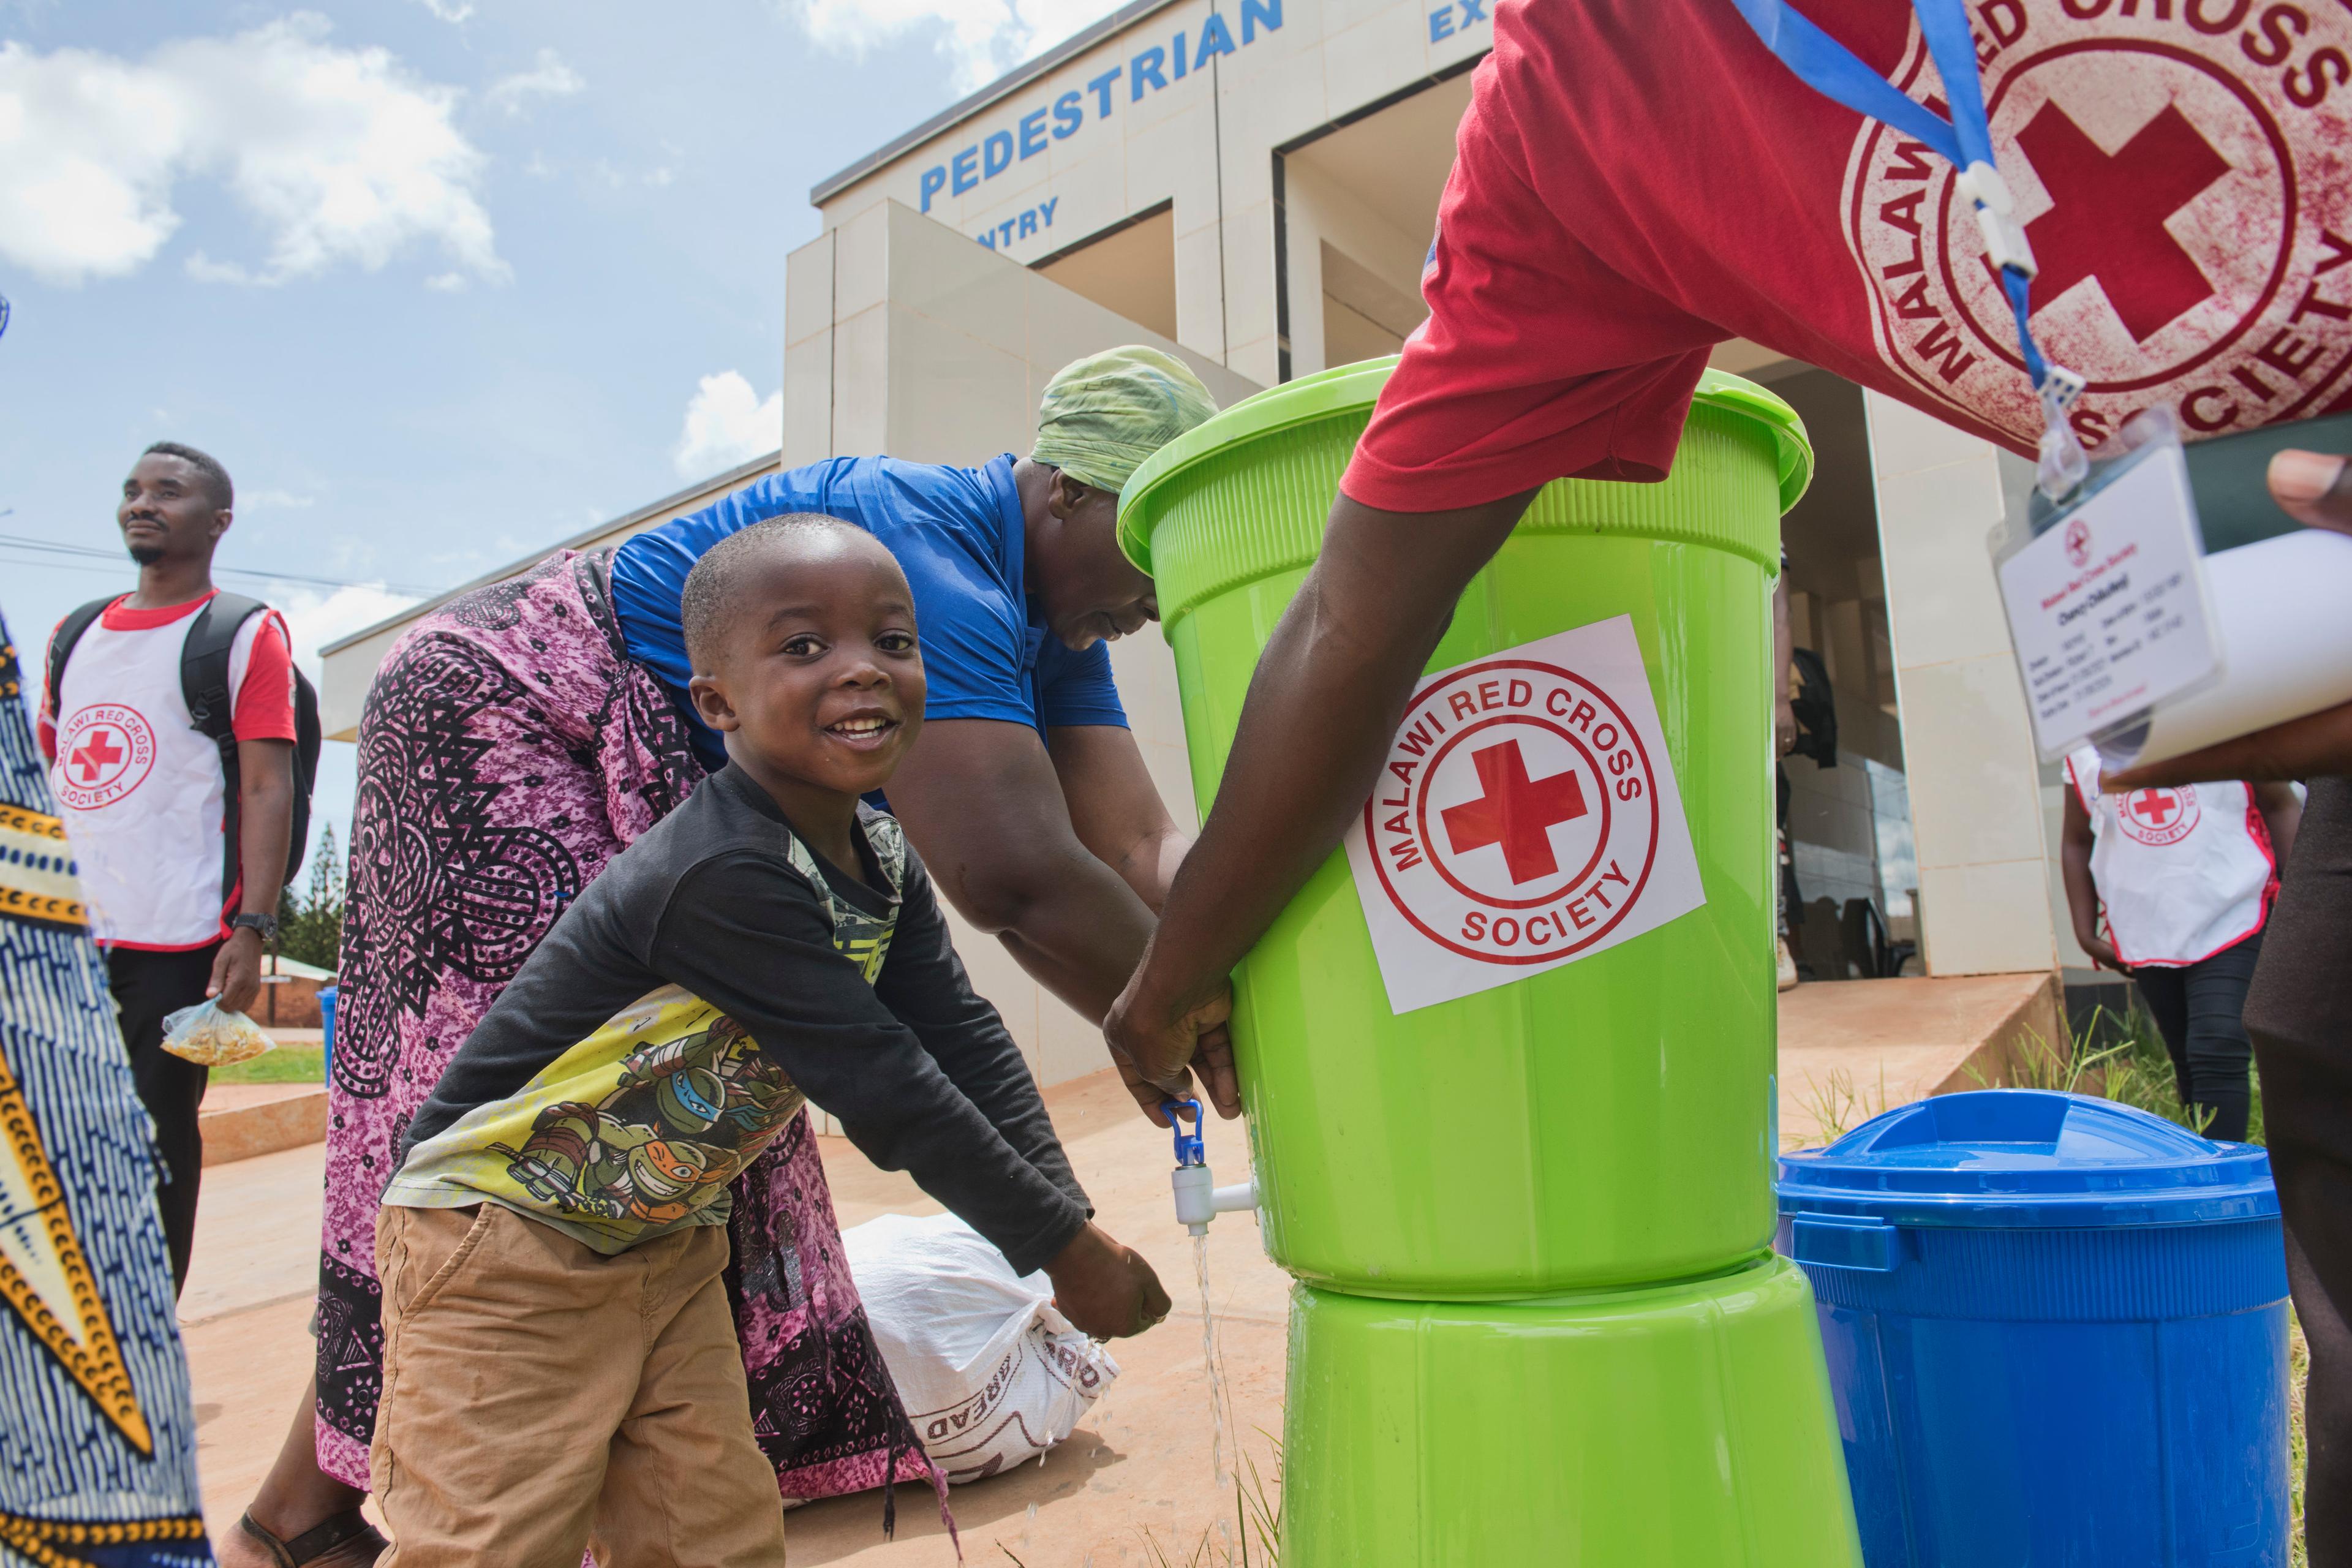 A young child washes his hands in a plastic basin with a large Malawi Red Cross sticker on it. An adult, whose head cannot be seen, turns on the tap. On the adult's T-shirt, the same Malawi Red Cross logo.